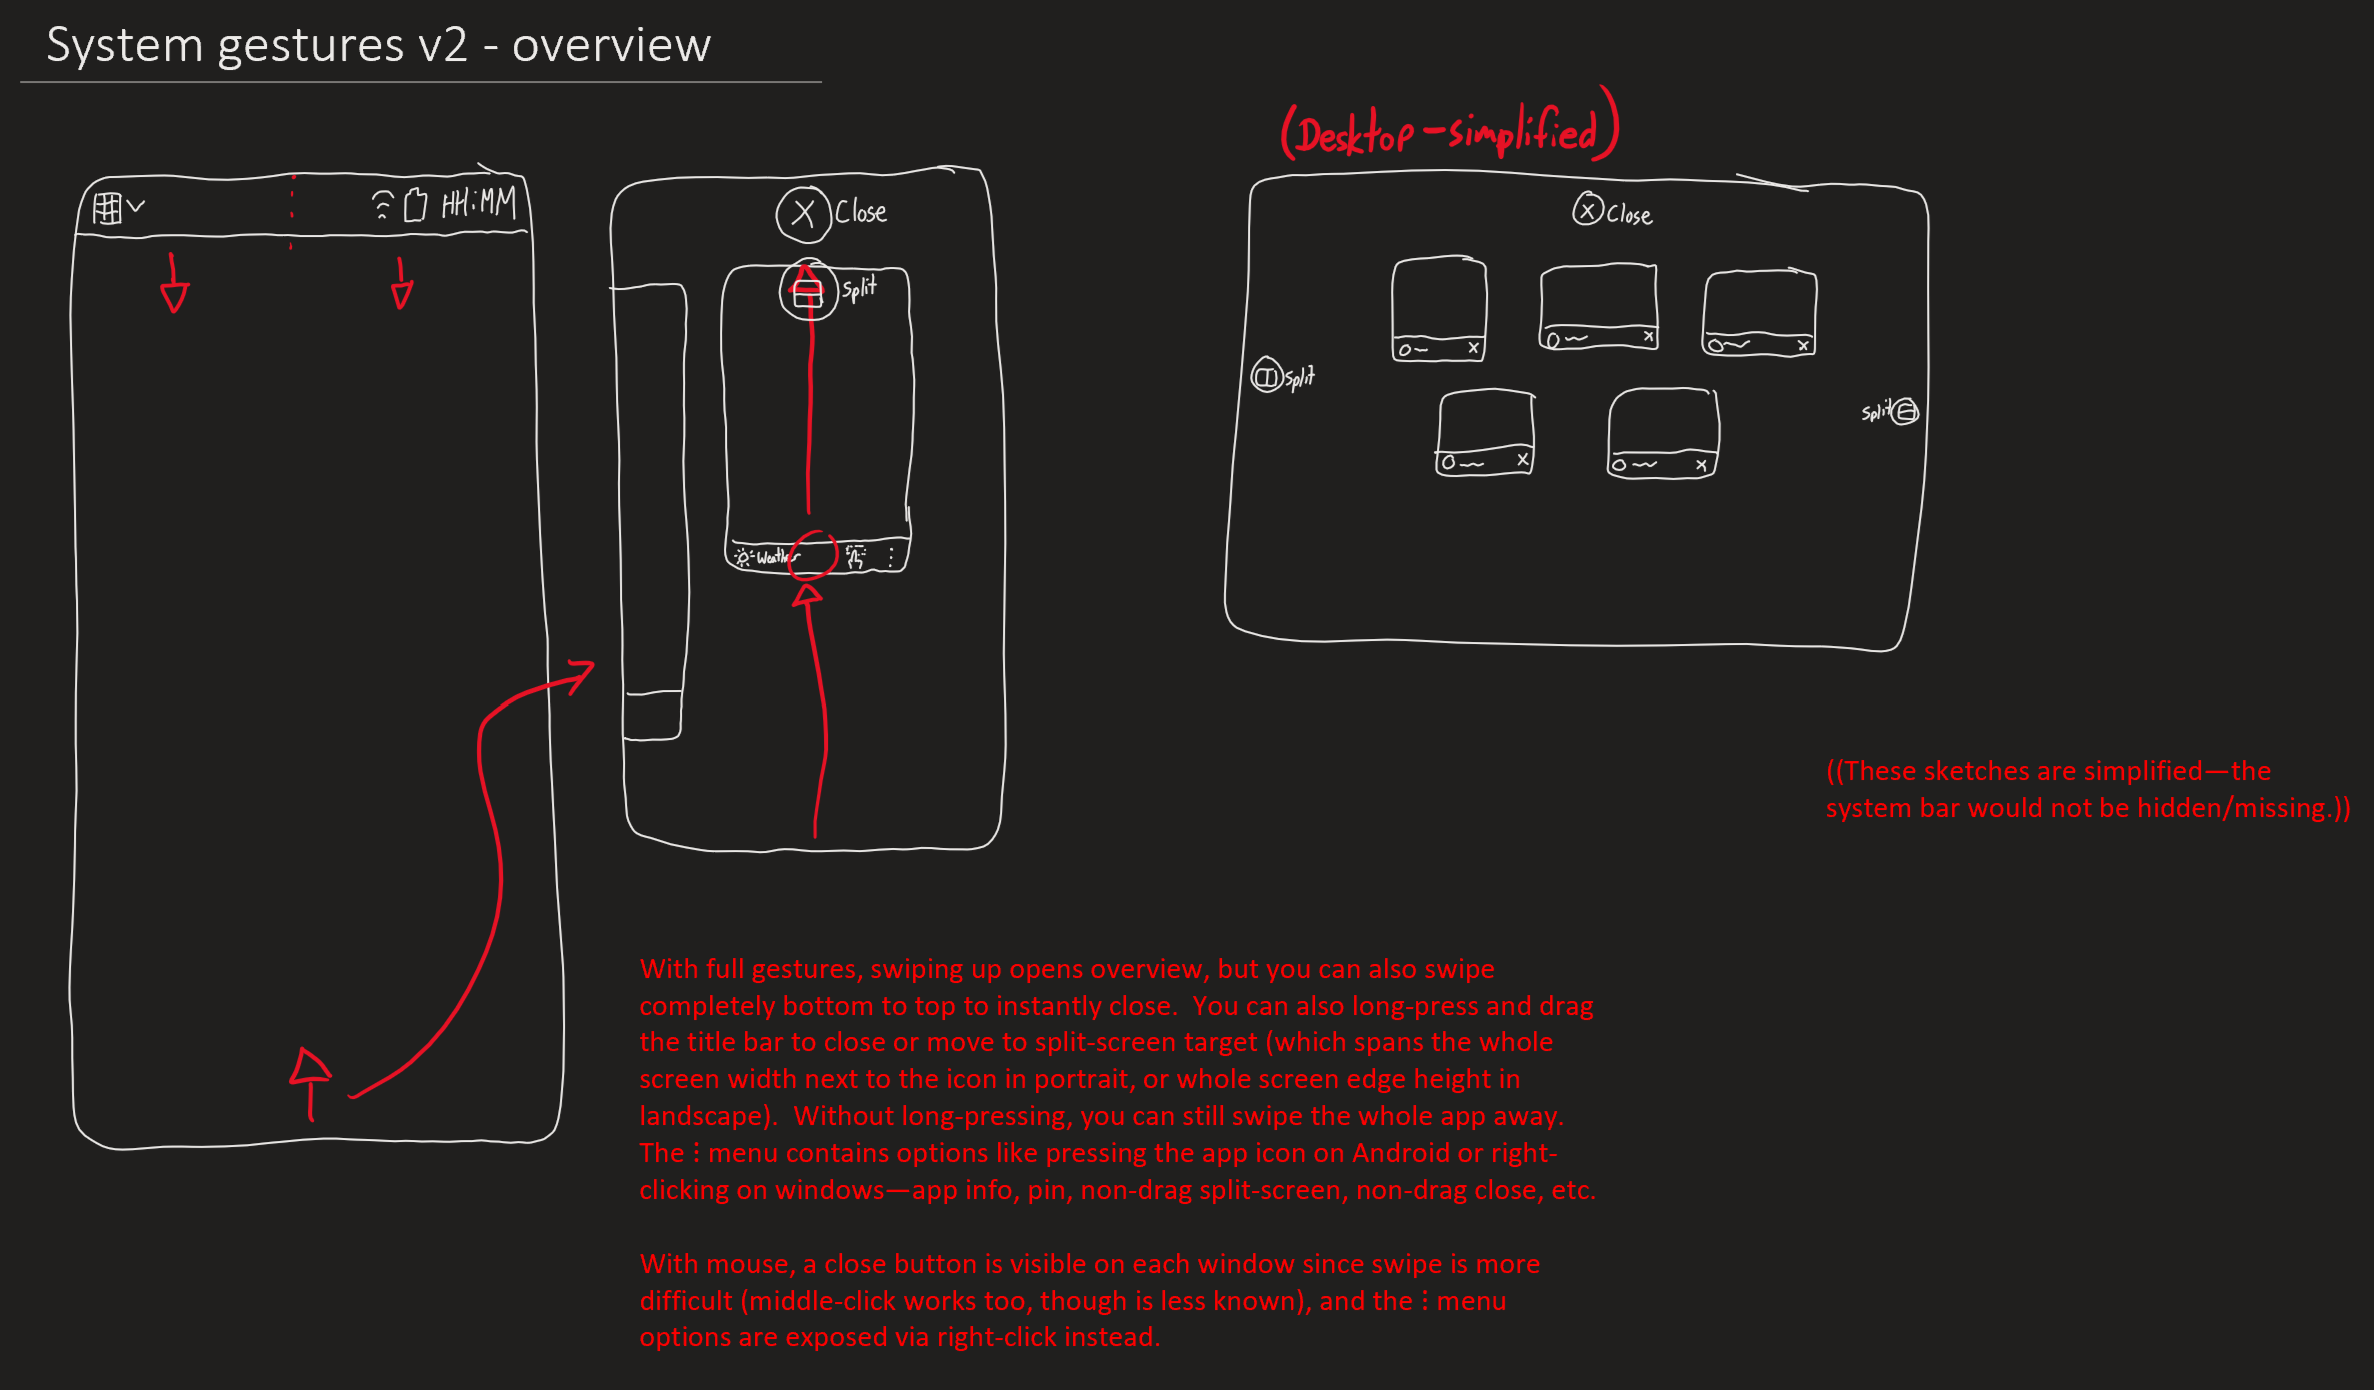 A sketch titled, System gestures v2 - overview.  Swiping up from the bottom opens the ovierview view, but you can also swipe completely bottom to top to instantly close.  In overview, you can long-press and drag the title bar to close or move to split-screen target.  An ellipsis menu or right-click contains options to access info, pin, or split-screen or close without dragging.